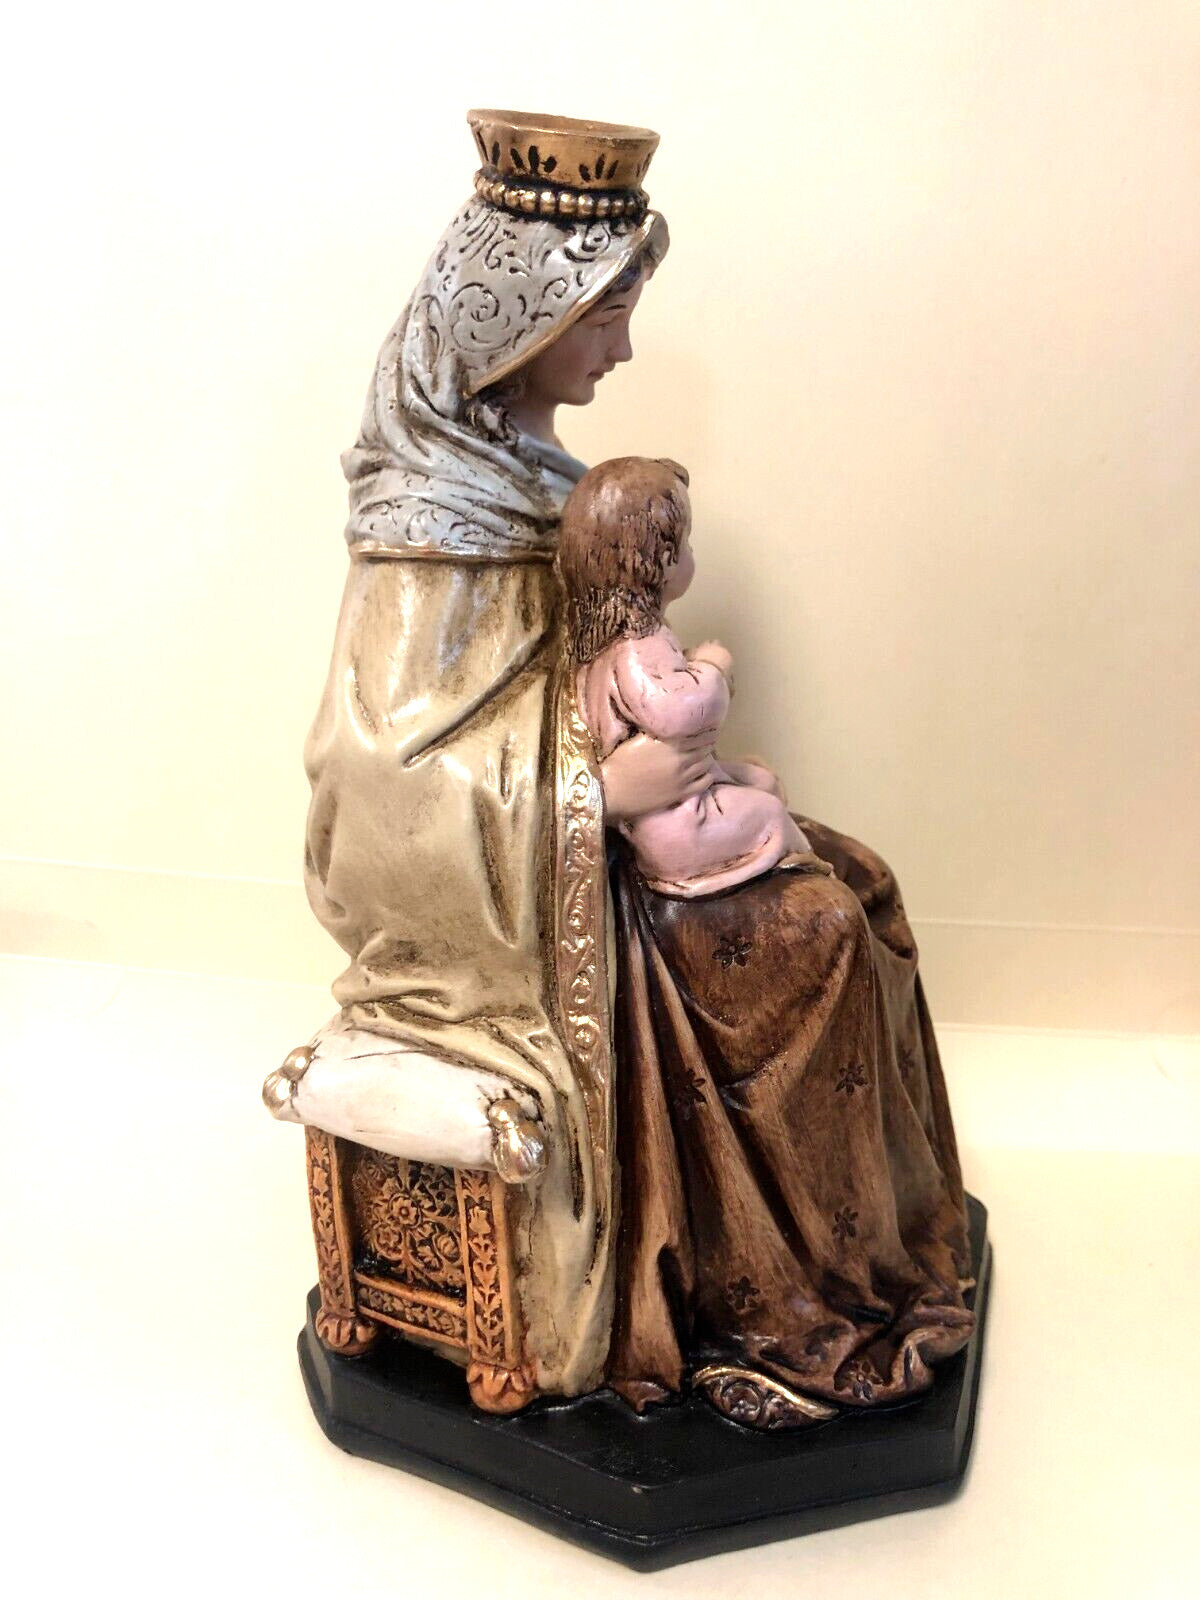 Our Lady of Mount Carmel 8" Statue, New from Colombia - Bob and Penny Lord